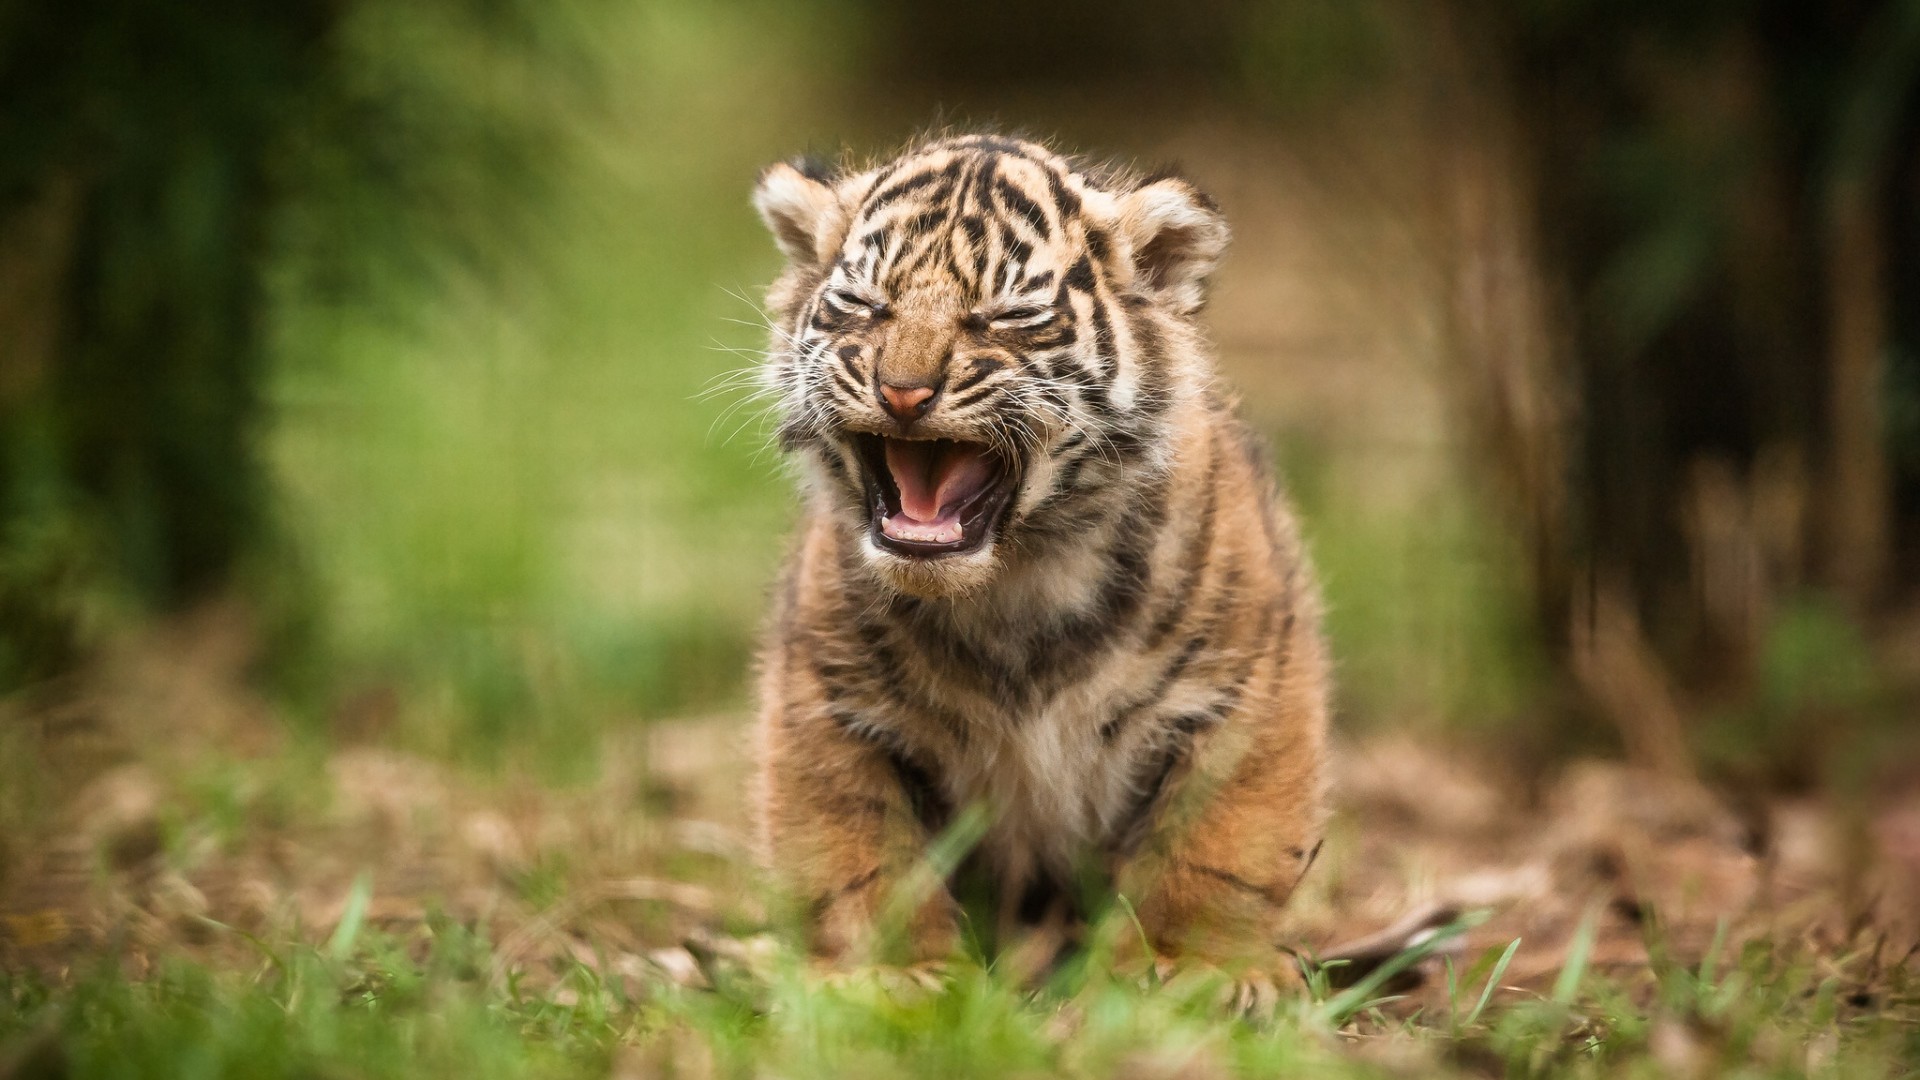 1920x1080 Search Results for “baby tiger wallpaper hd” – Adorable Wallpapers